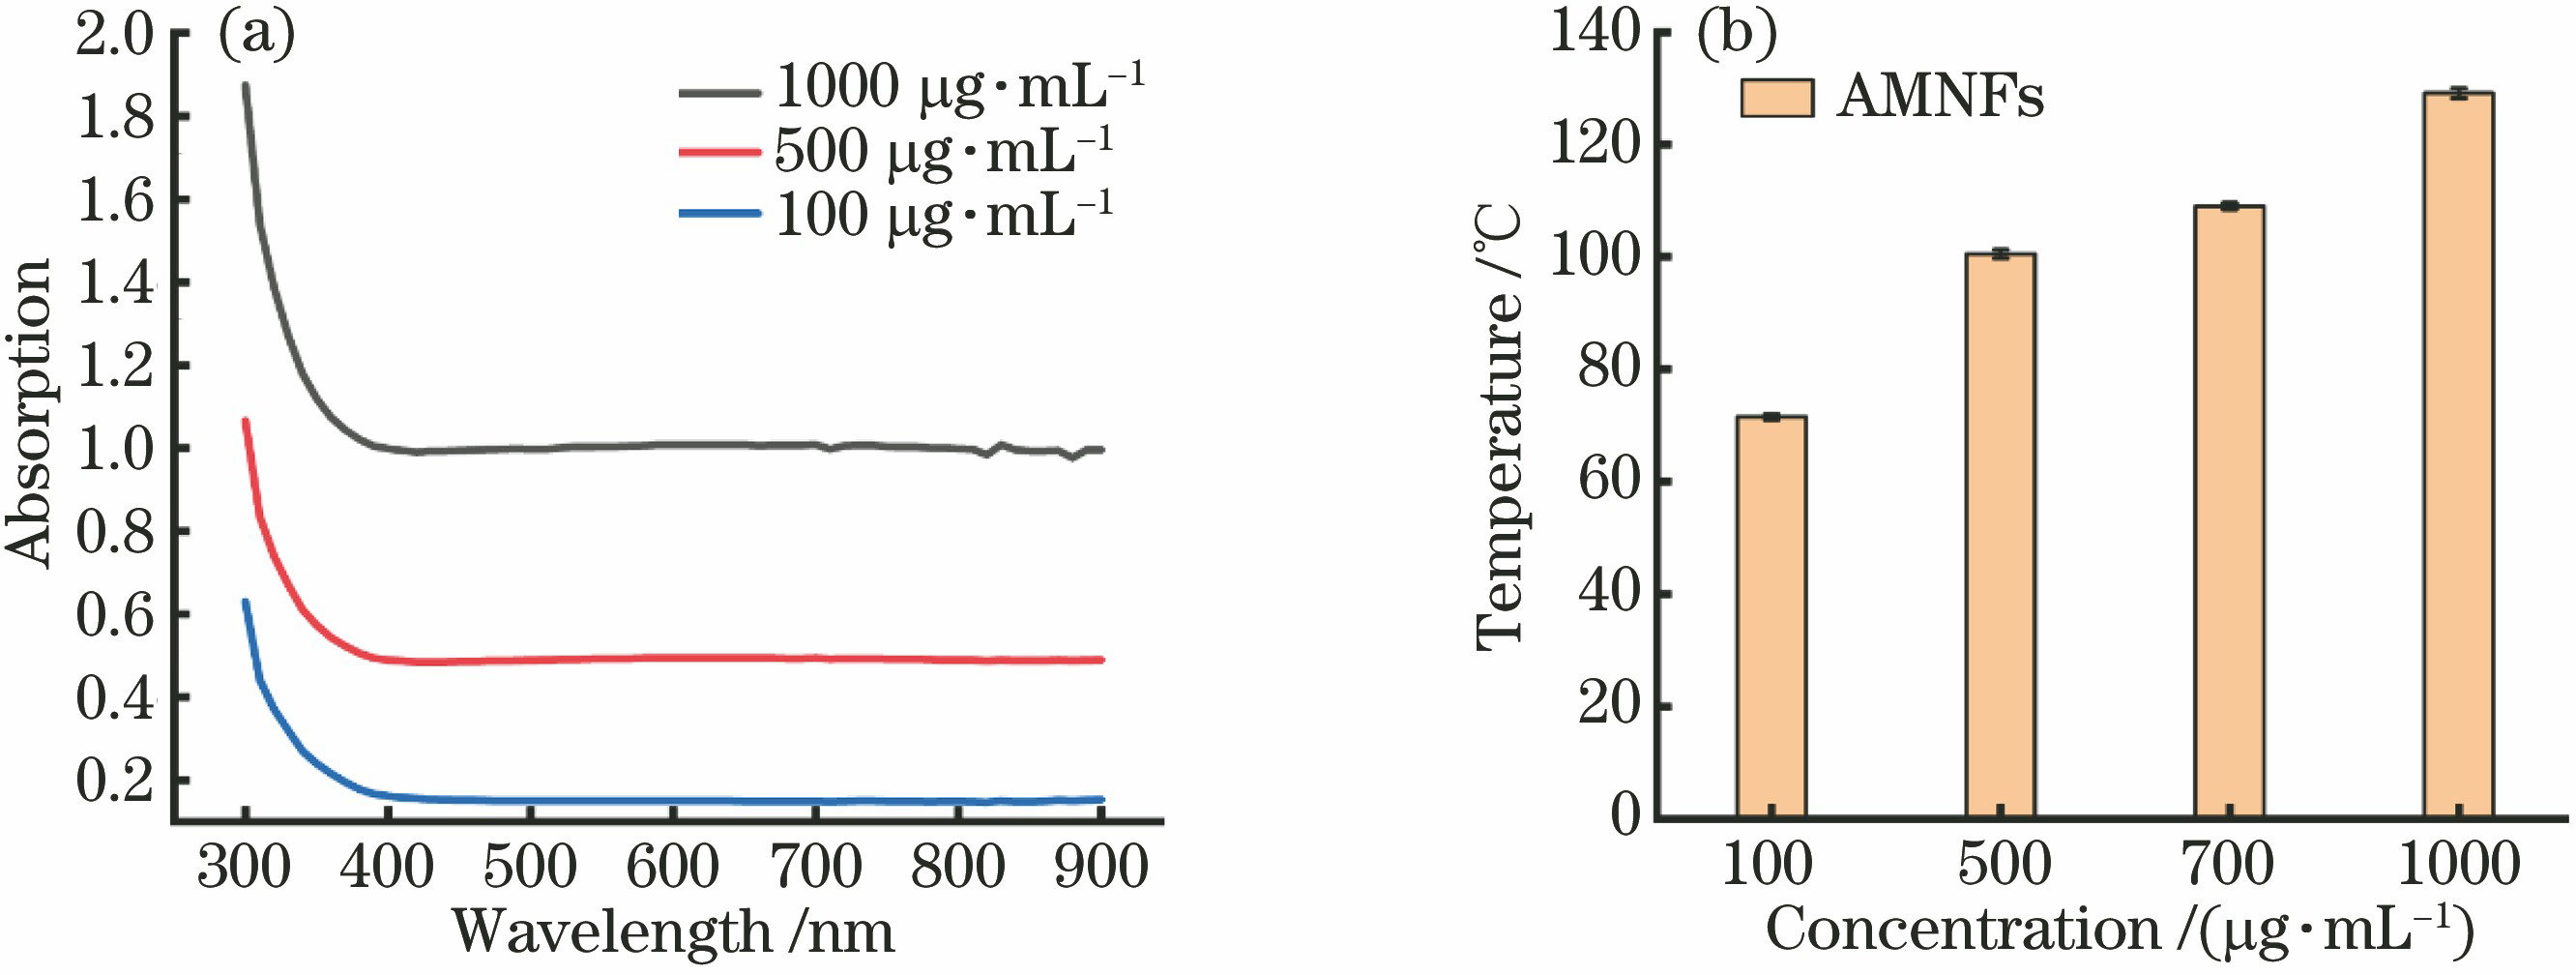 Optical properties of AMNFs. (a) Absorption spectra of AMNFs with different concentration; (b) photothermal conversion performance of AMNFs